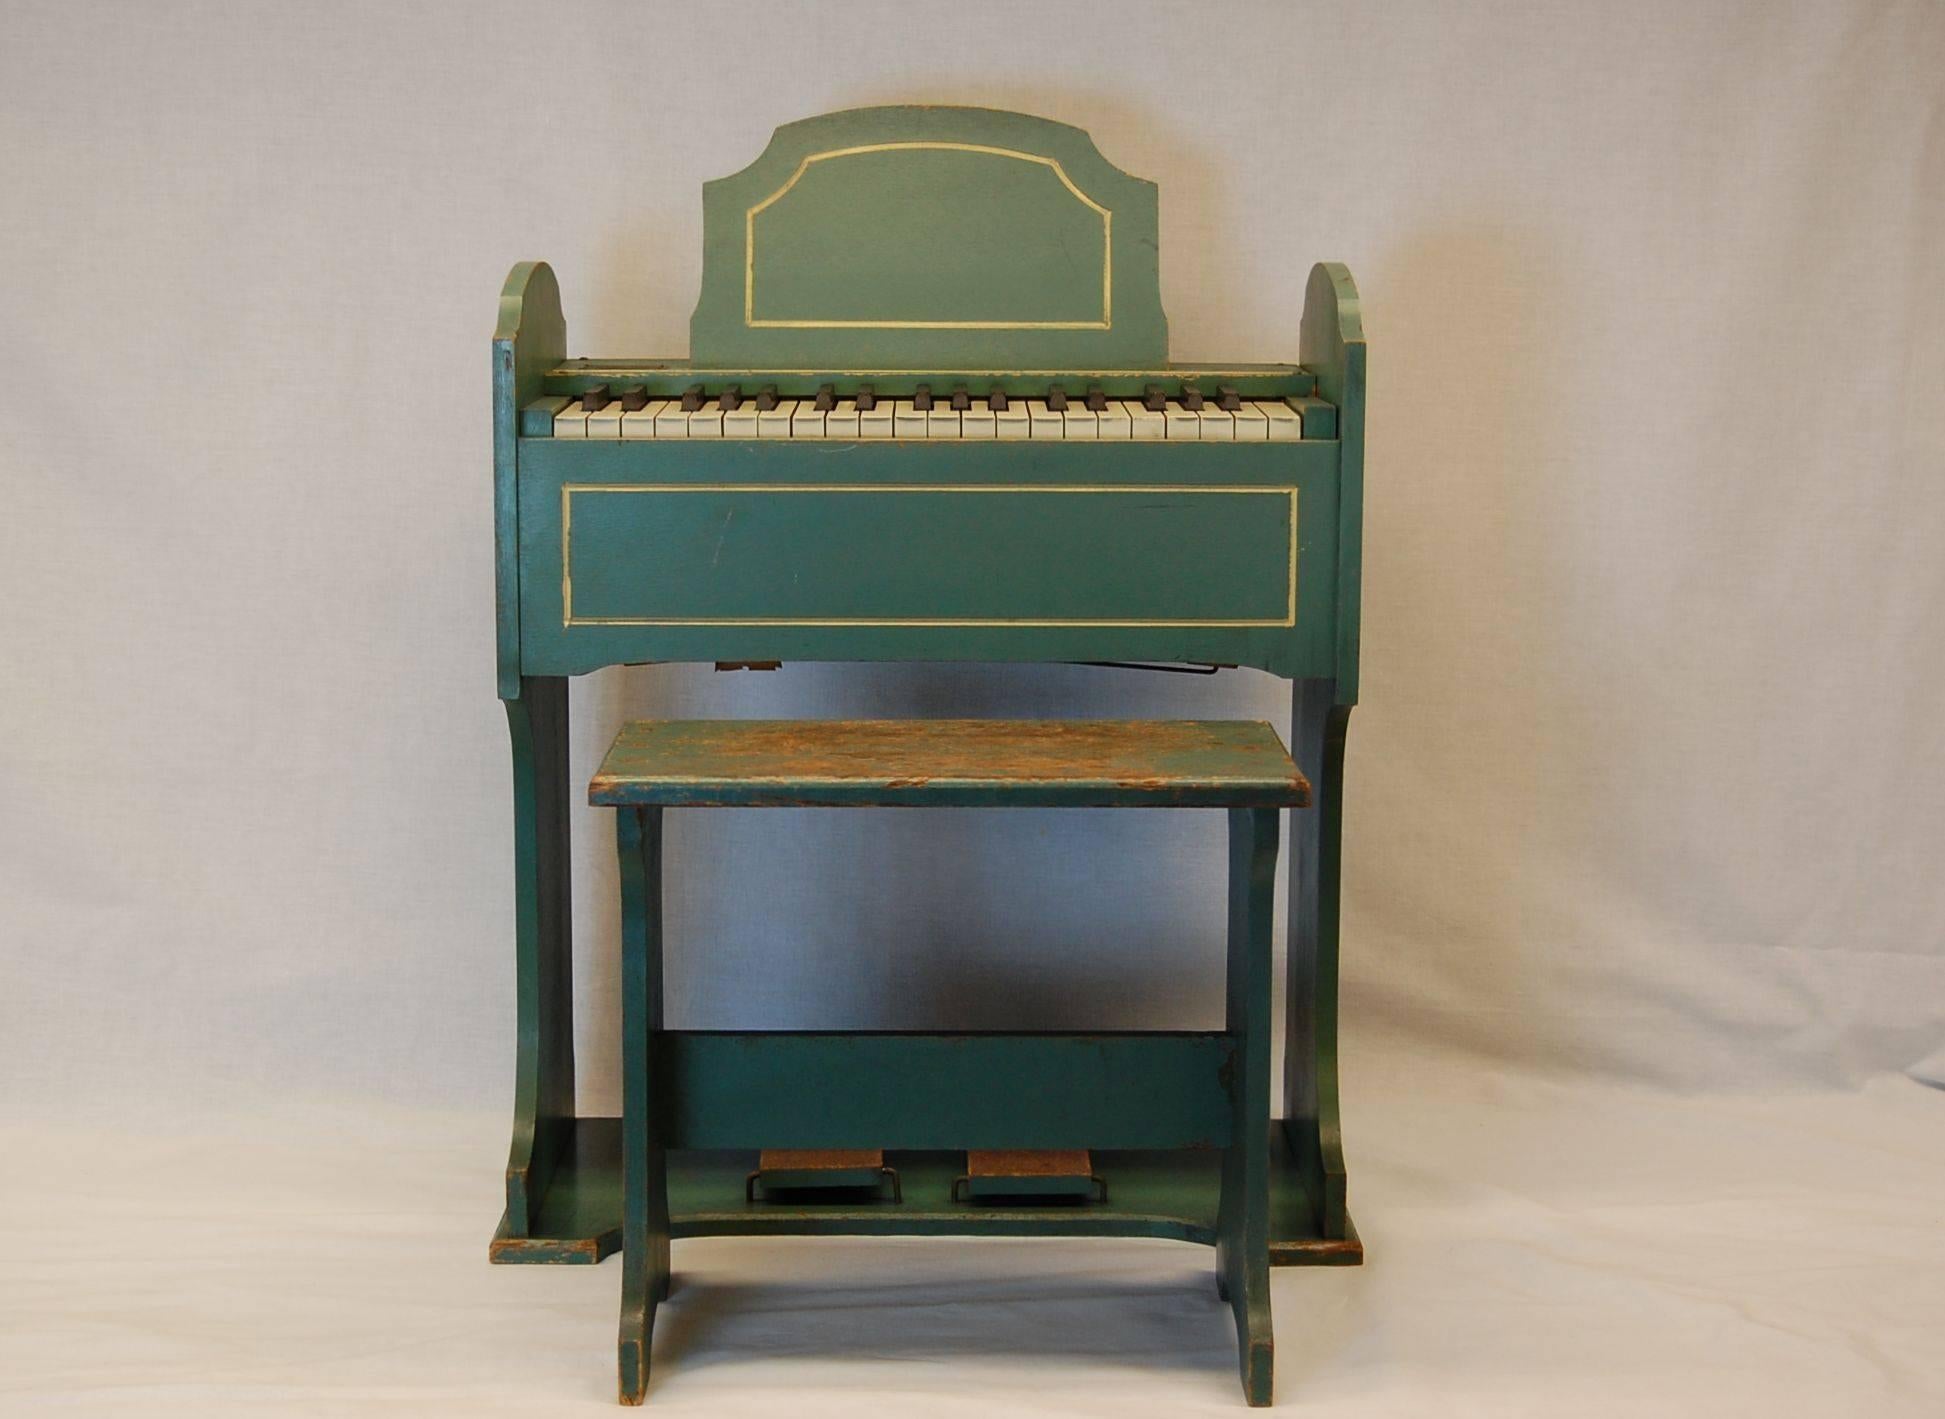 Wonderful child's organ circa the late 1930s or early 1940s, good overall condition. Comes with the original stool and easel. In the 1930s and 1940s, Estey developed a line of pint-sized, foot-pumped, miniature “children’s organs” for small players.